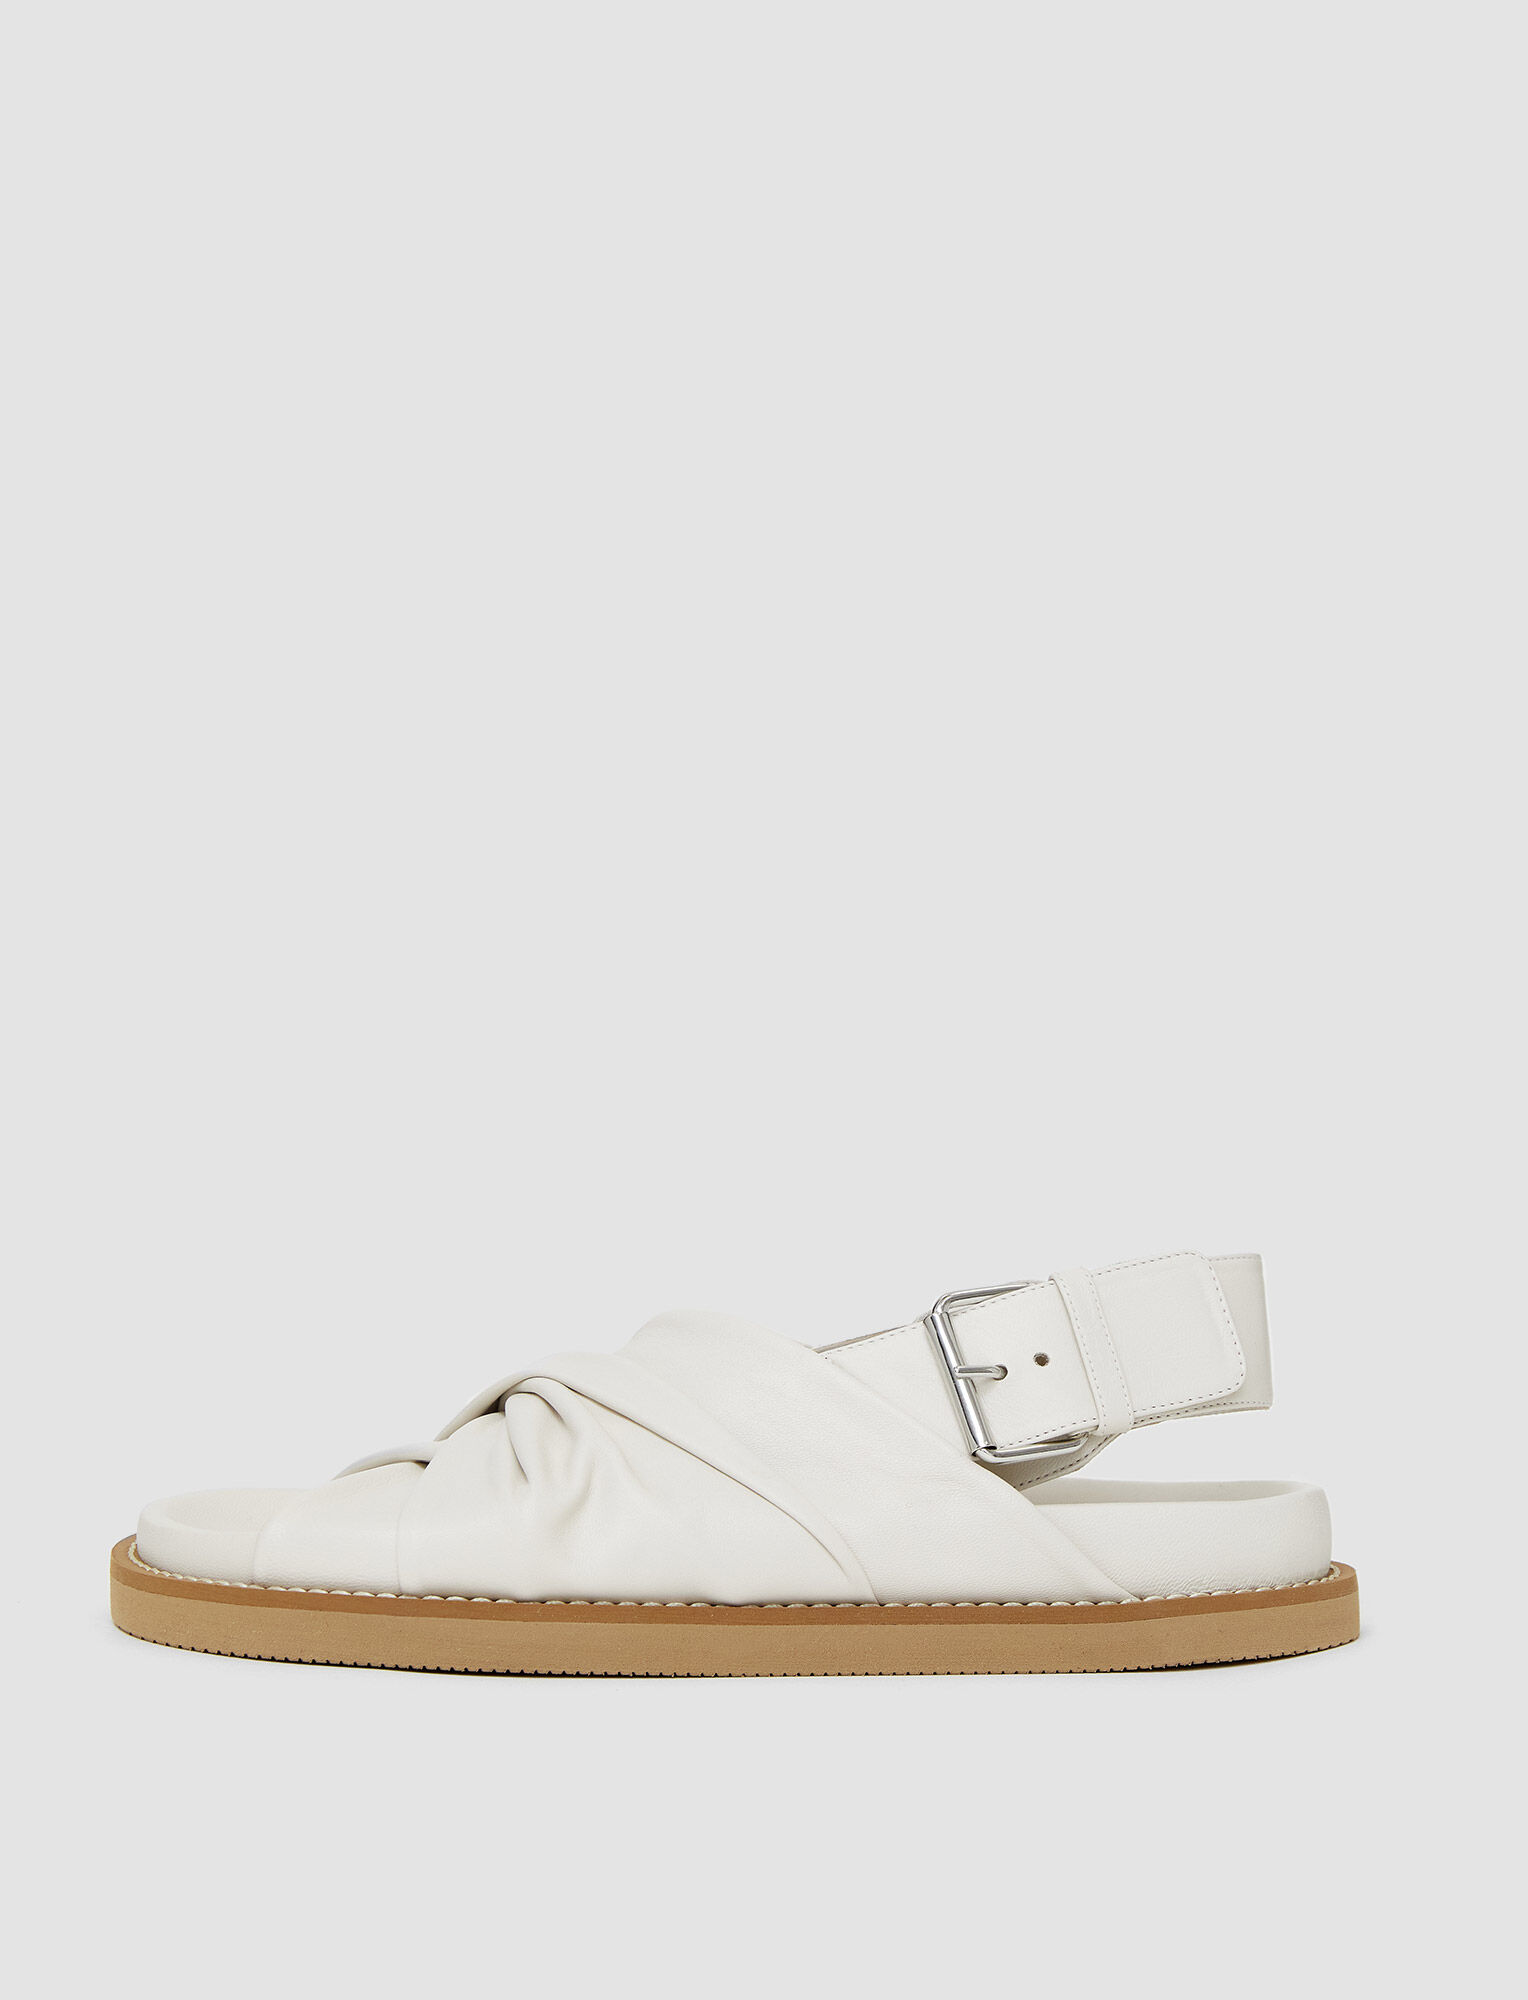 Joseph, Leather Jazzy Strap Sandals, in Ivory